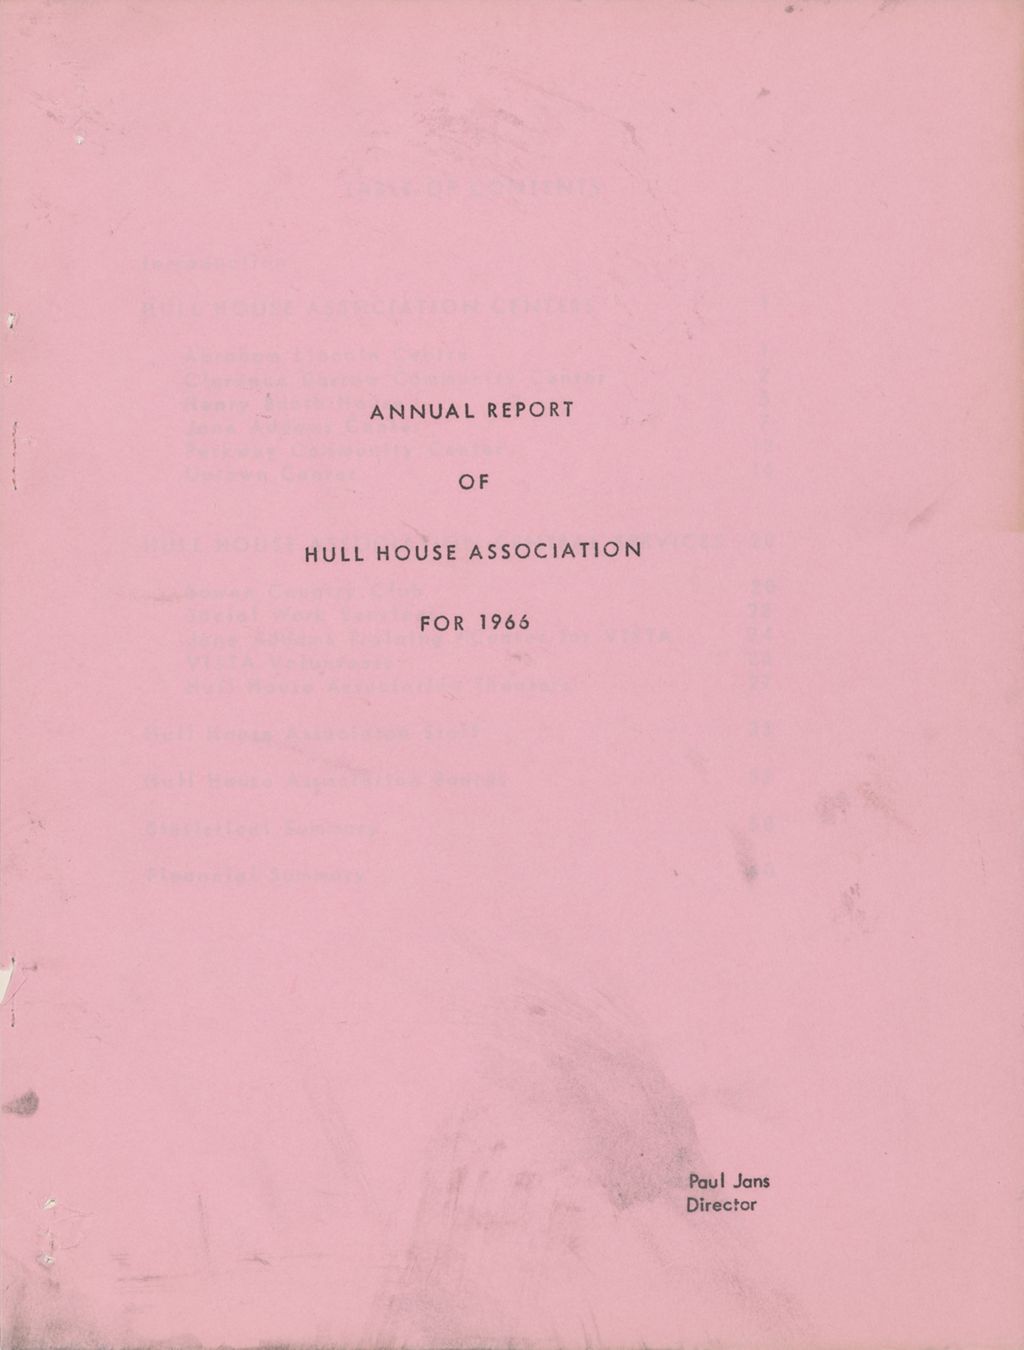 Miniature of Hull House Association, Annual Report, 1966